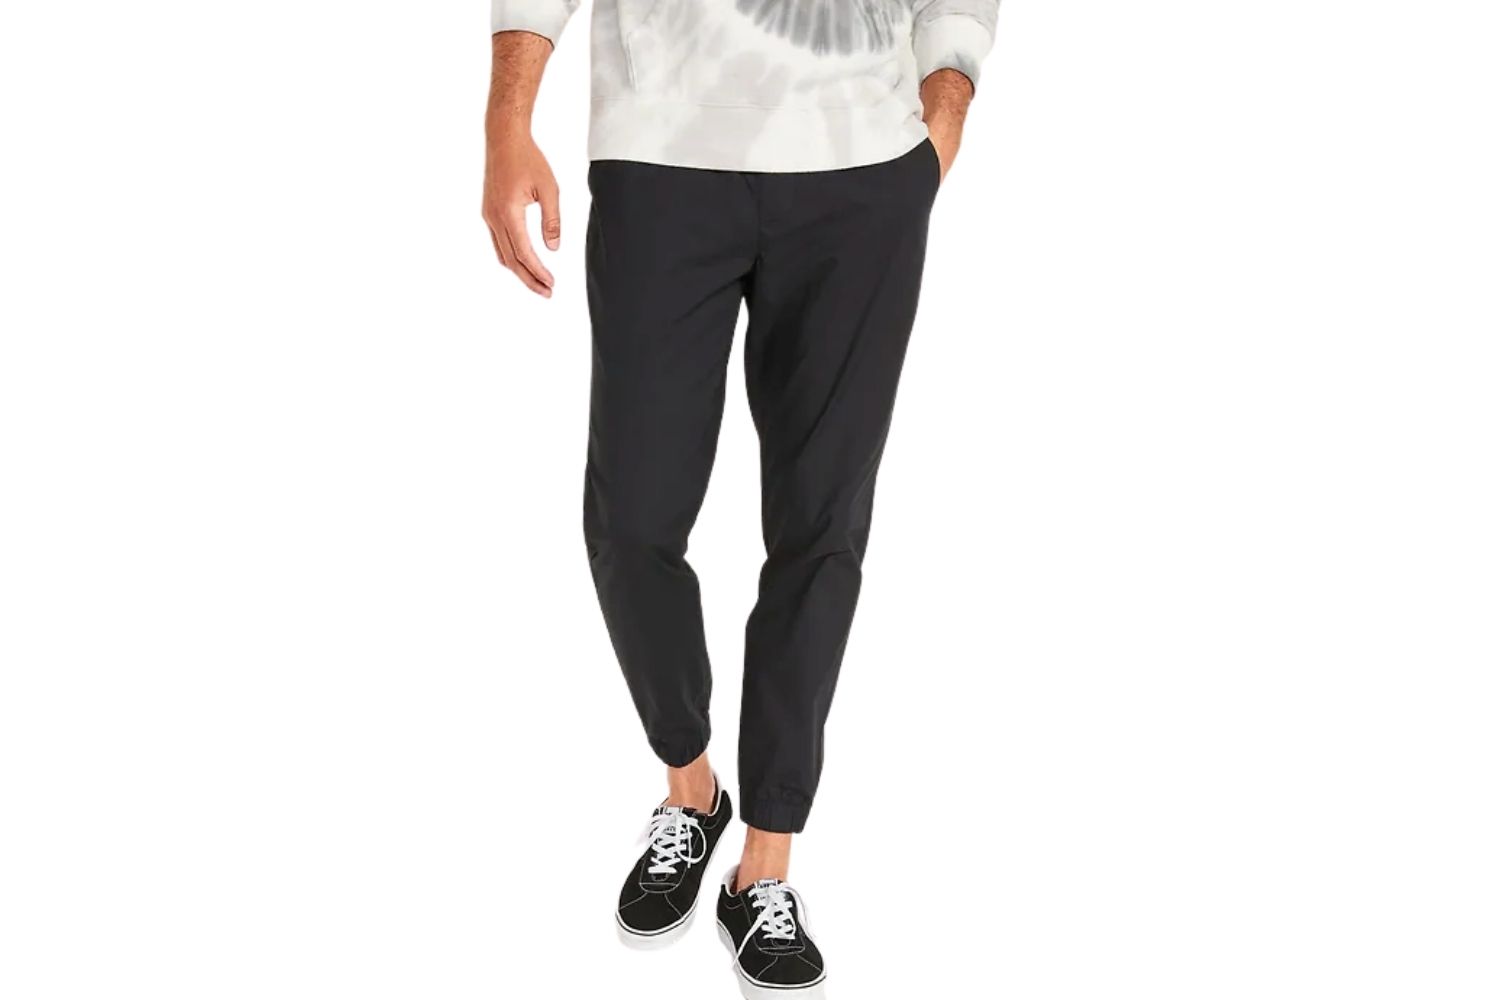 The 8 Best Stylish Joggers for Men - The Manual